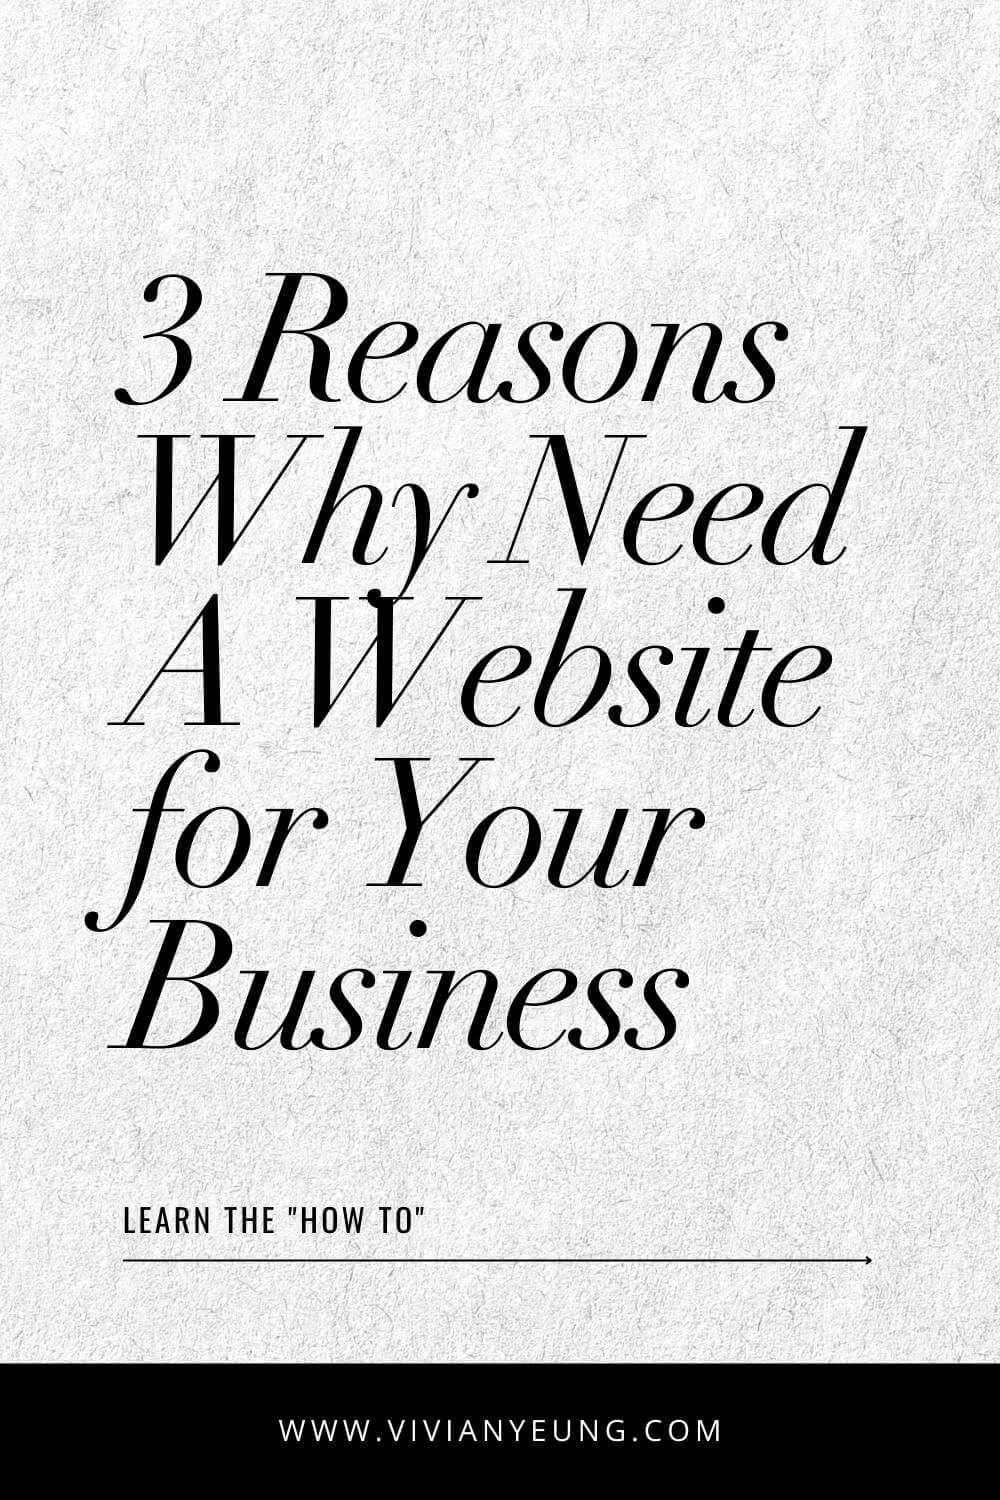 Why Website Is Important For Small Business Make More Money Tips 5